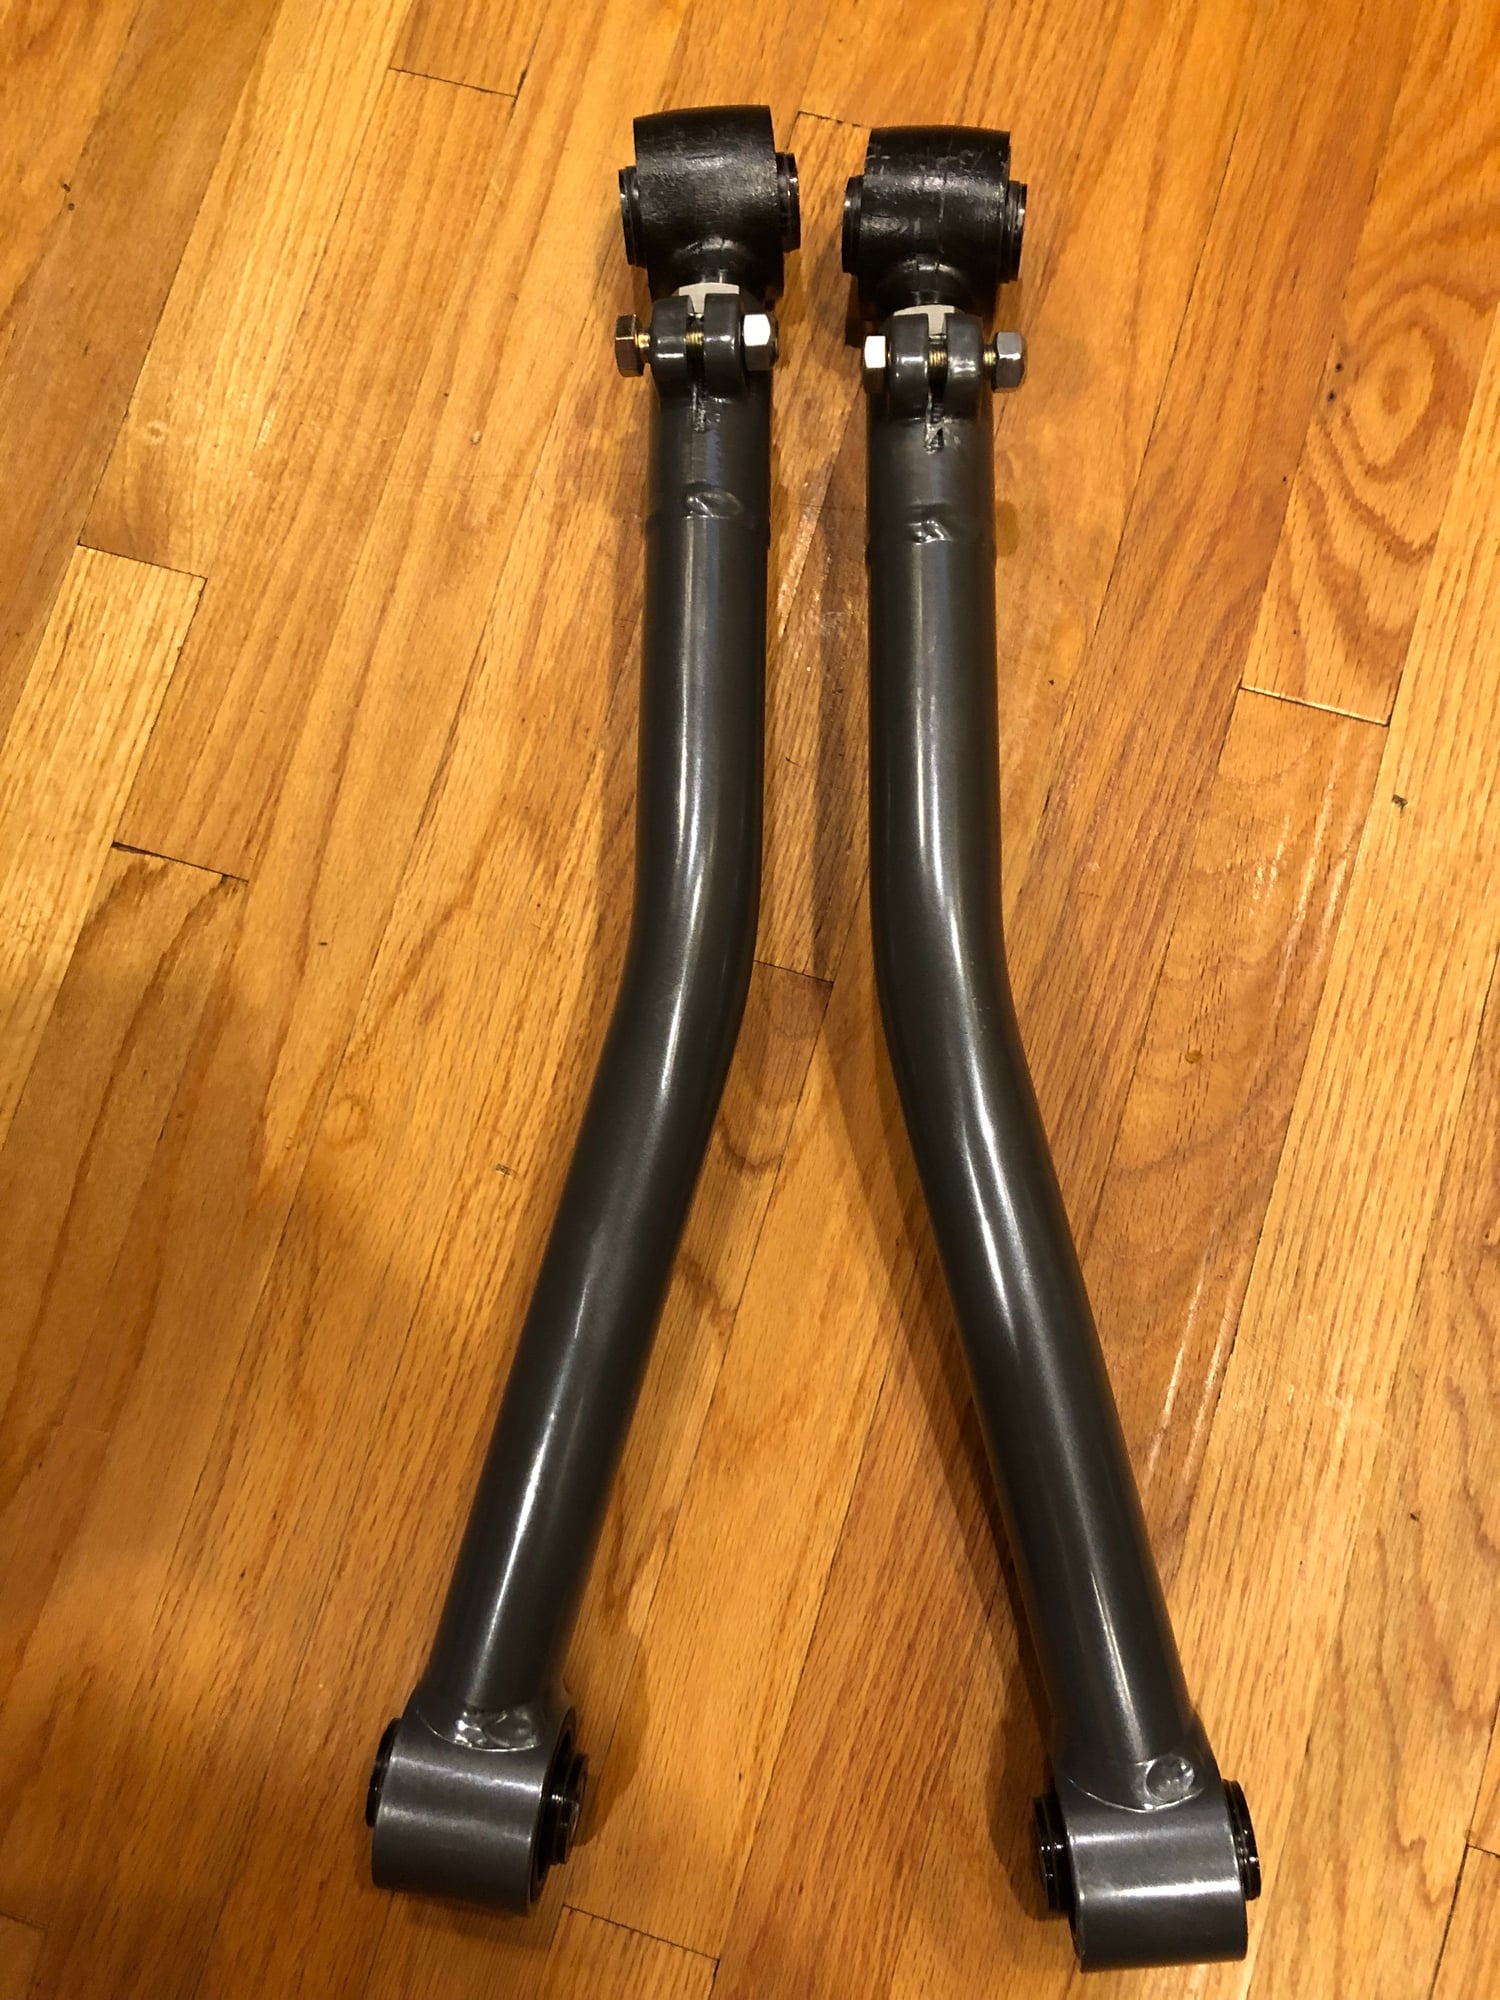 Steering/Suspension - JK Synergy Adjustable Front Lower Control Arms (New) - New - 2007 to 2018 Jeep Wrangler - East Meadow, NY 11554, United States